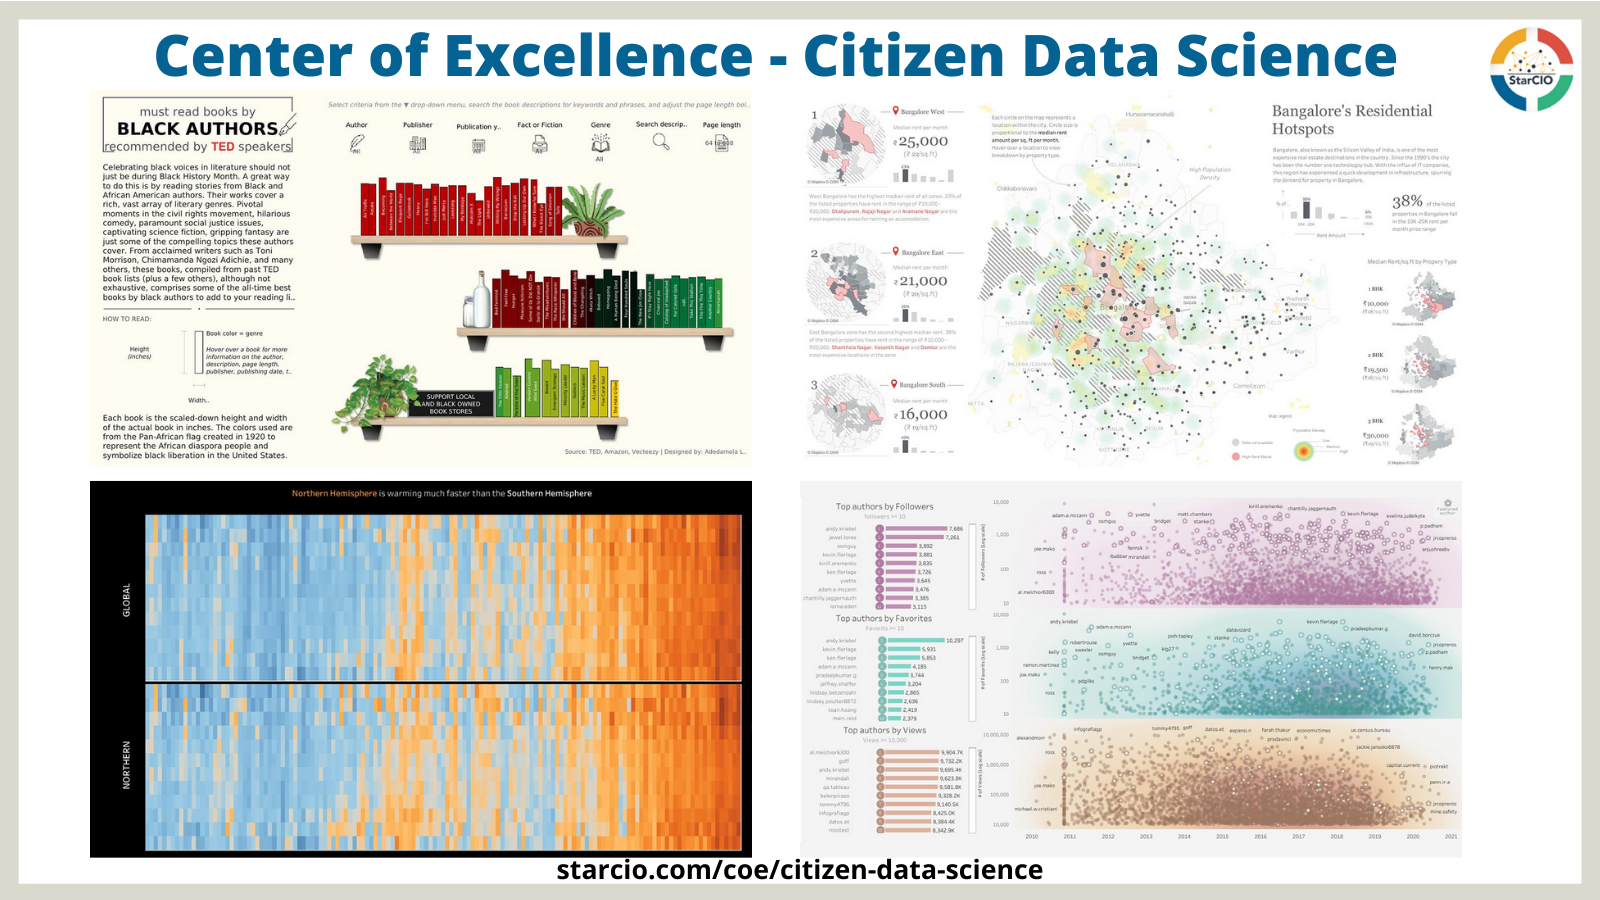 Energize a Center of Excellence that Empowers Citizen Data Scientists